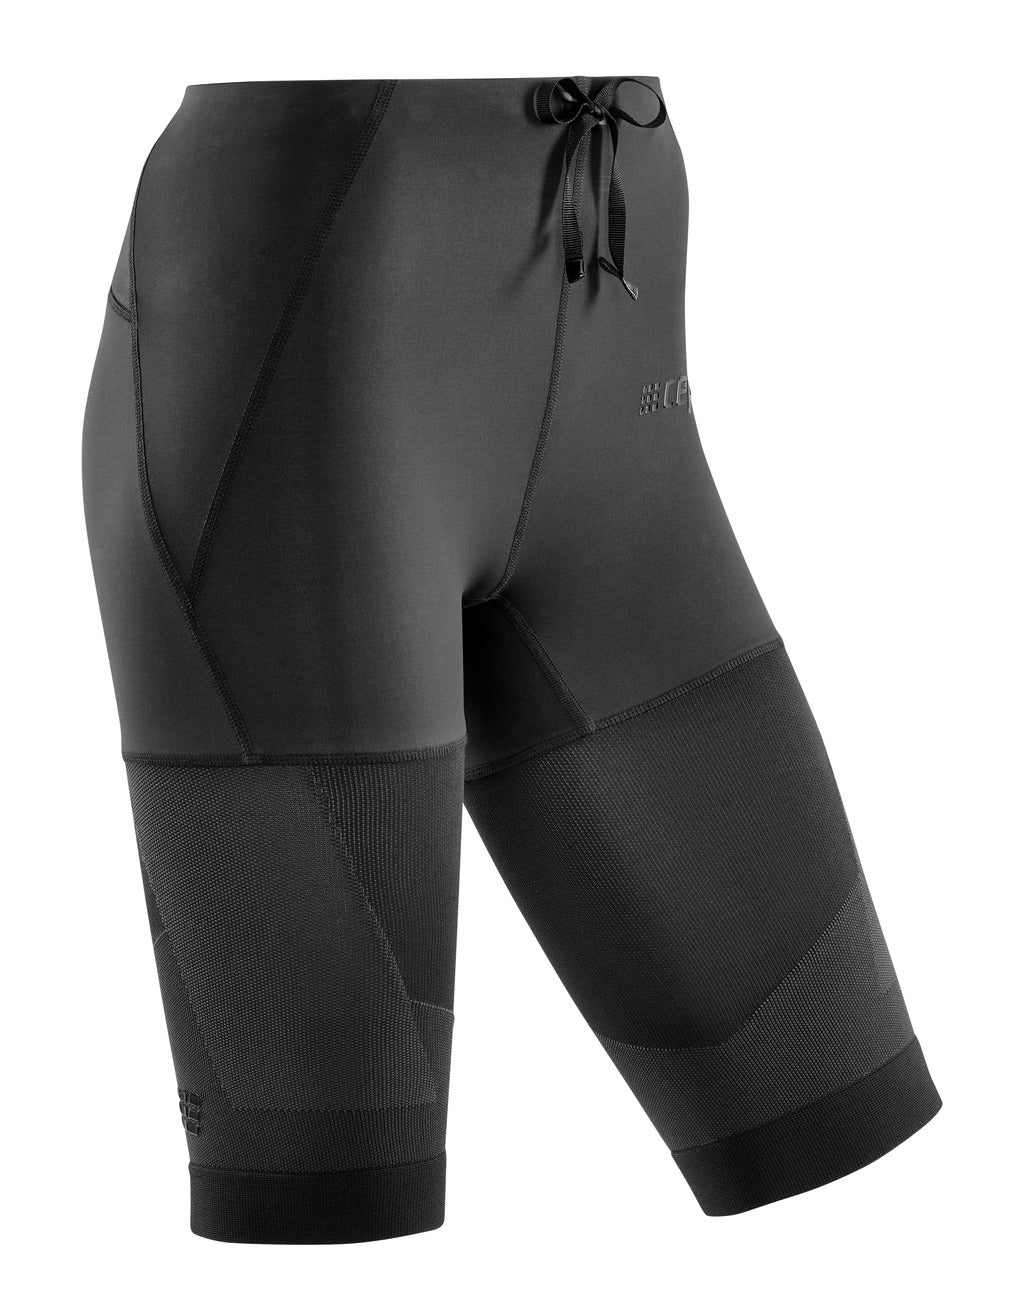 Mens 2-in-1 Training Compression Shorts 20-30mmHg